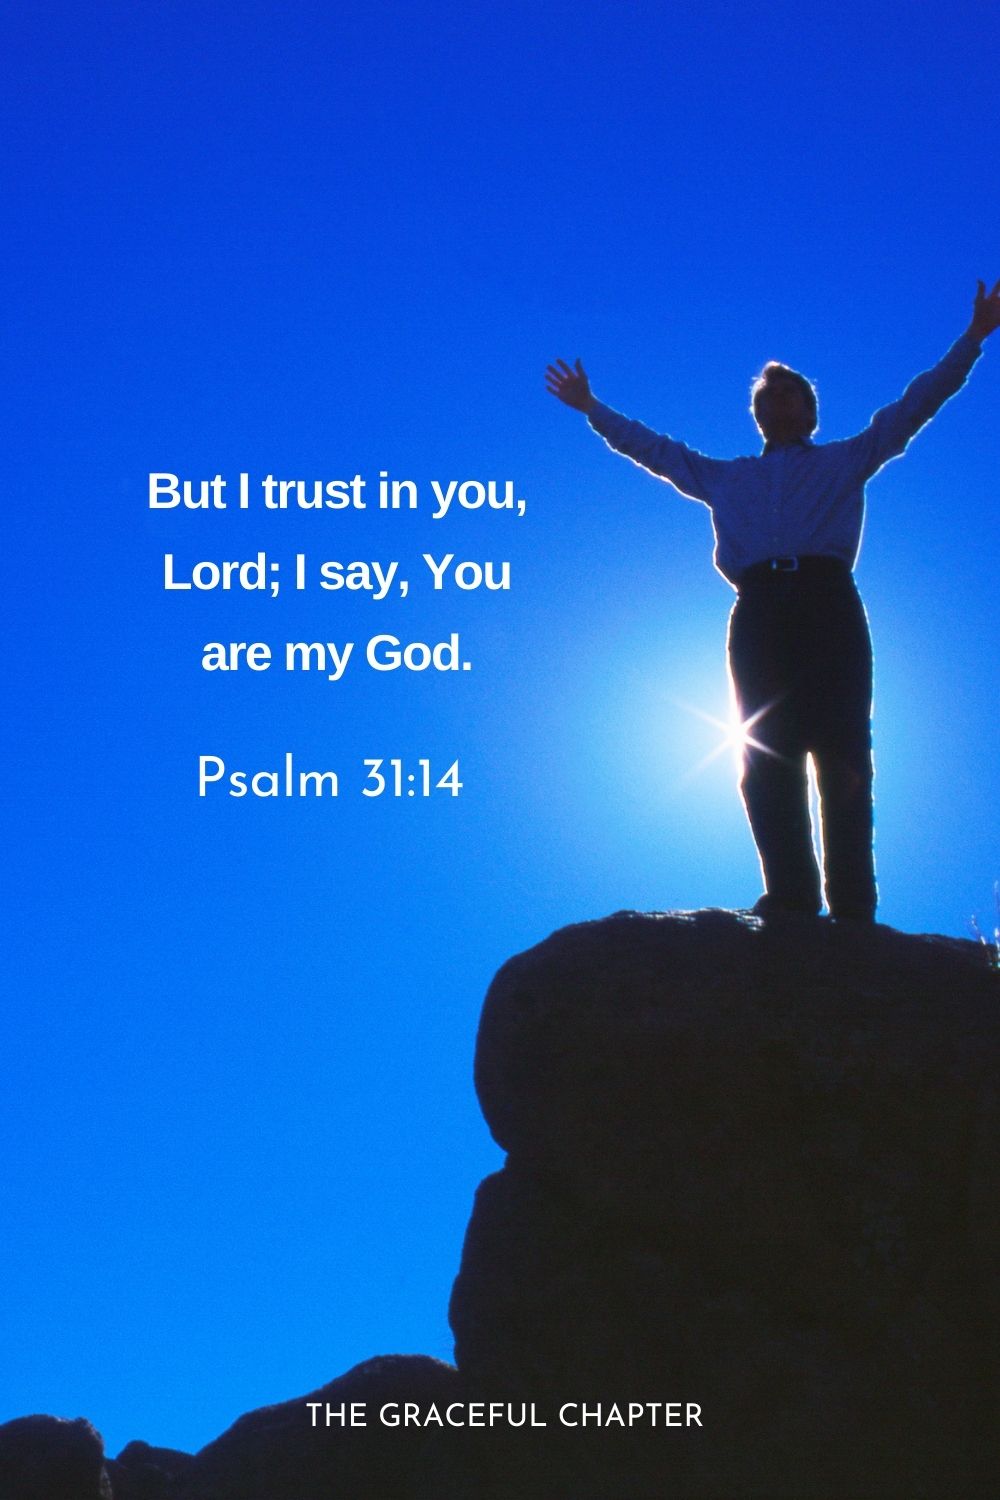 But I trust in you, Lord; I say, You are my God.